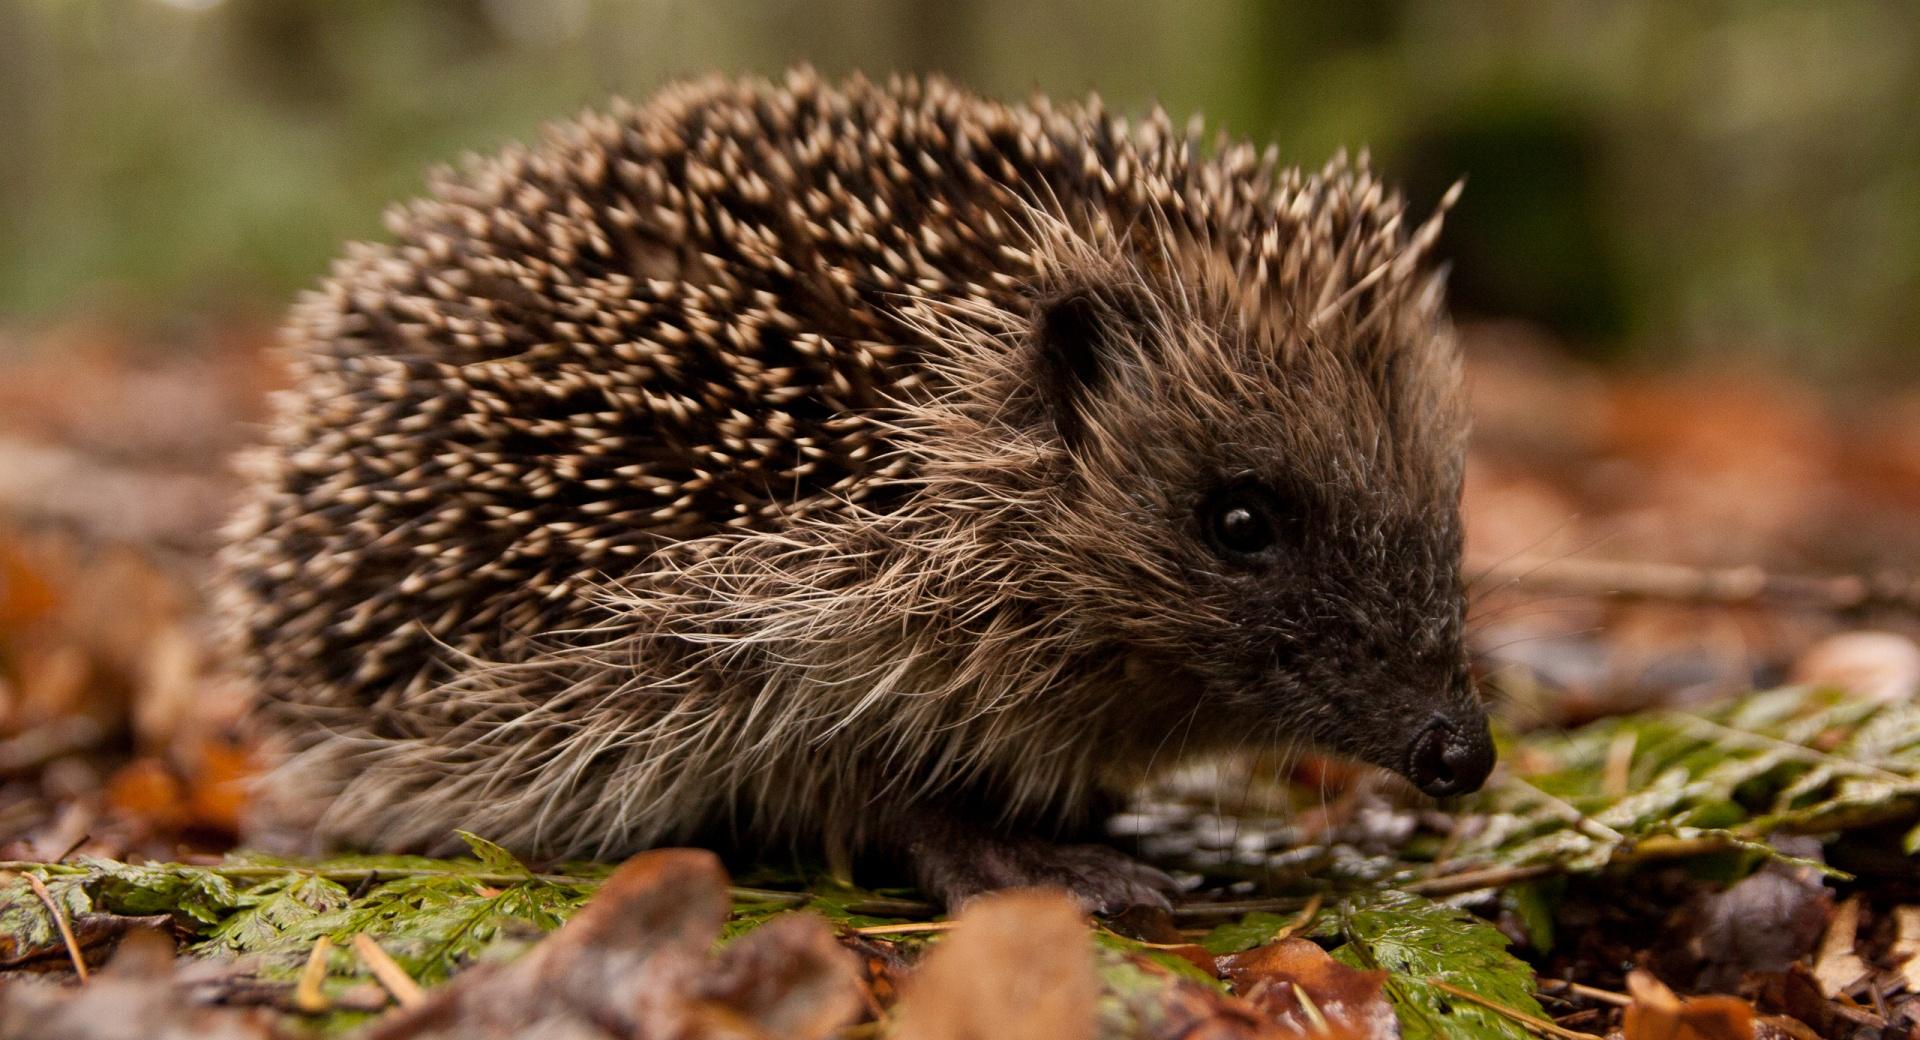 Hedgehog In The Forest wallpapers HD quality